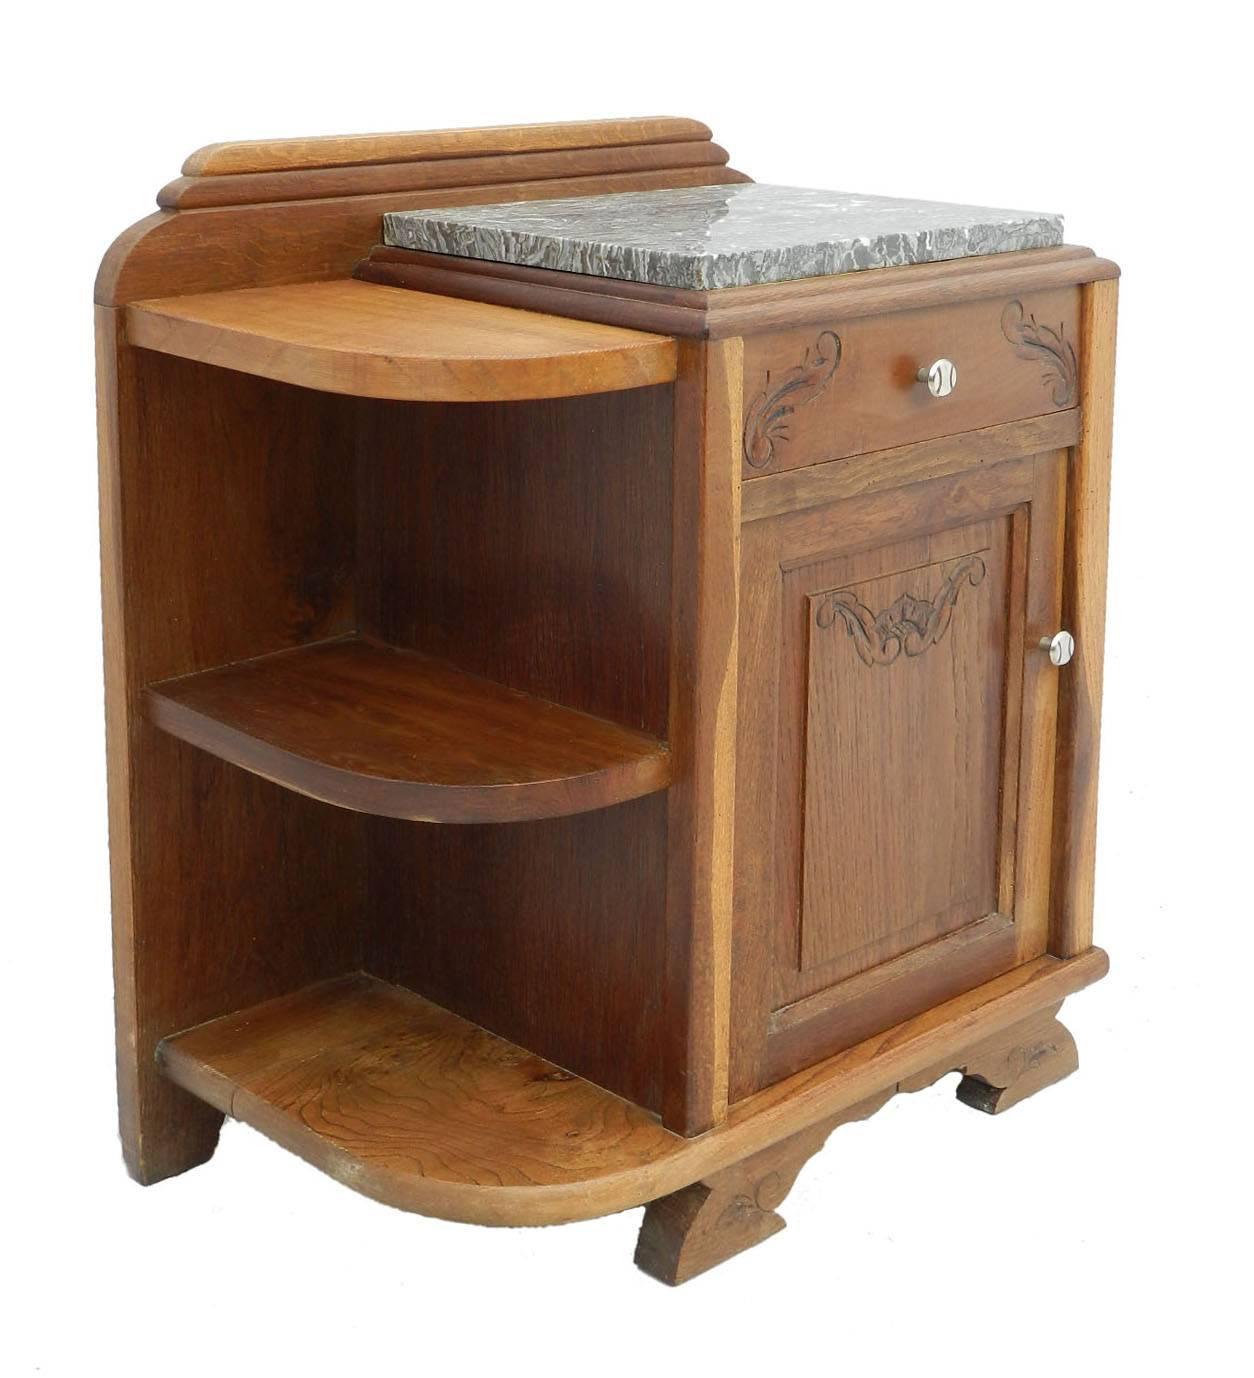 Pair of Art Deco side cabinets bedside tables nightstands
Unusual with side book shelves
French carved solid oak (two color oak)
Variegated marble tops
Good condition for their age with only minor signs of wear for their age.
We offer a global